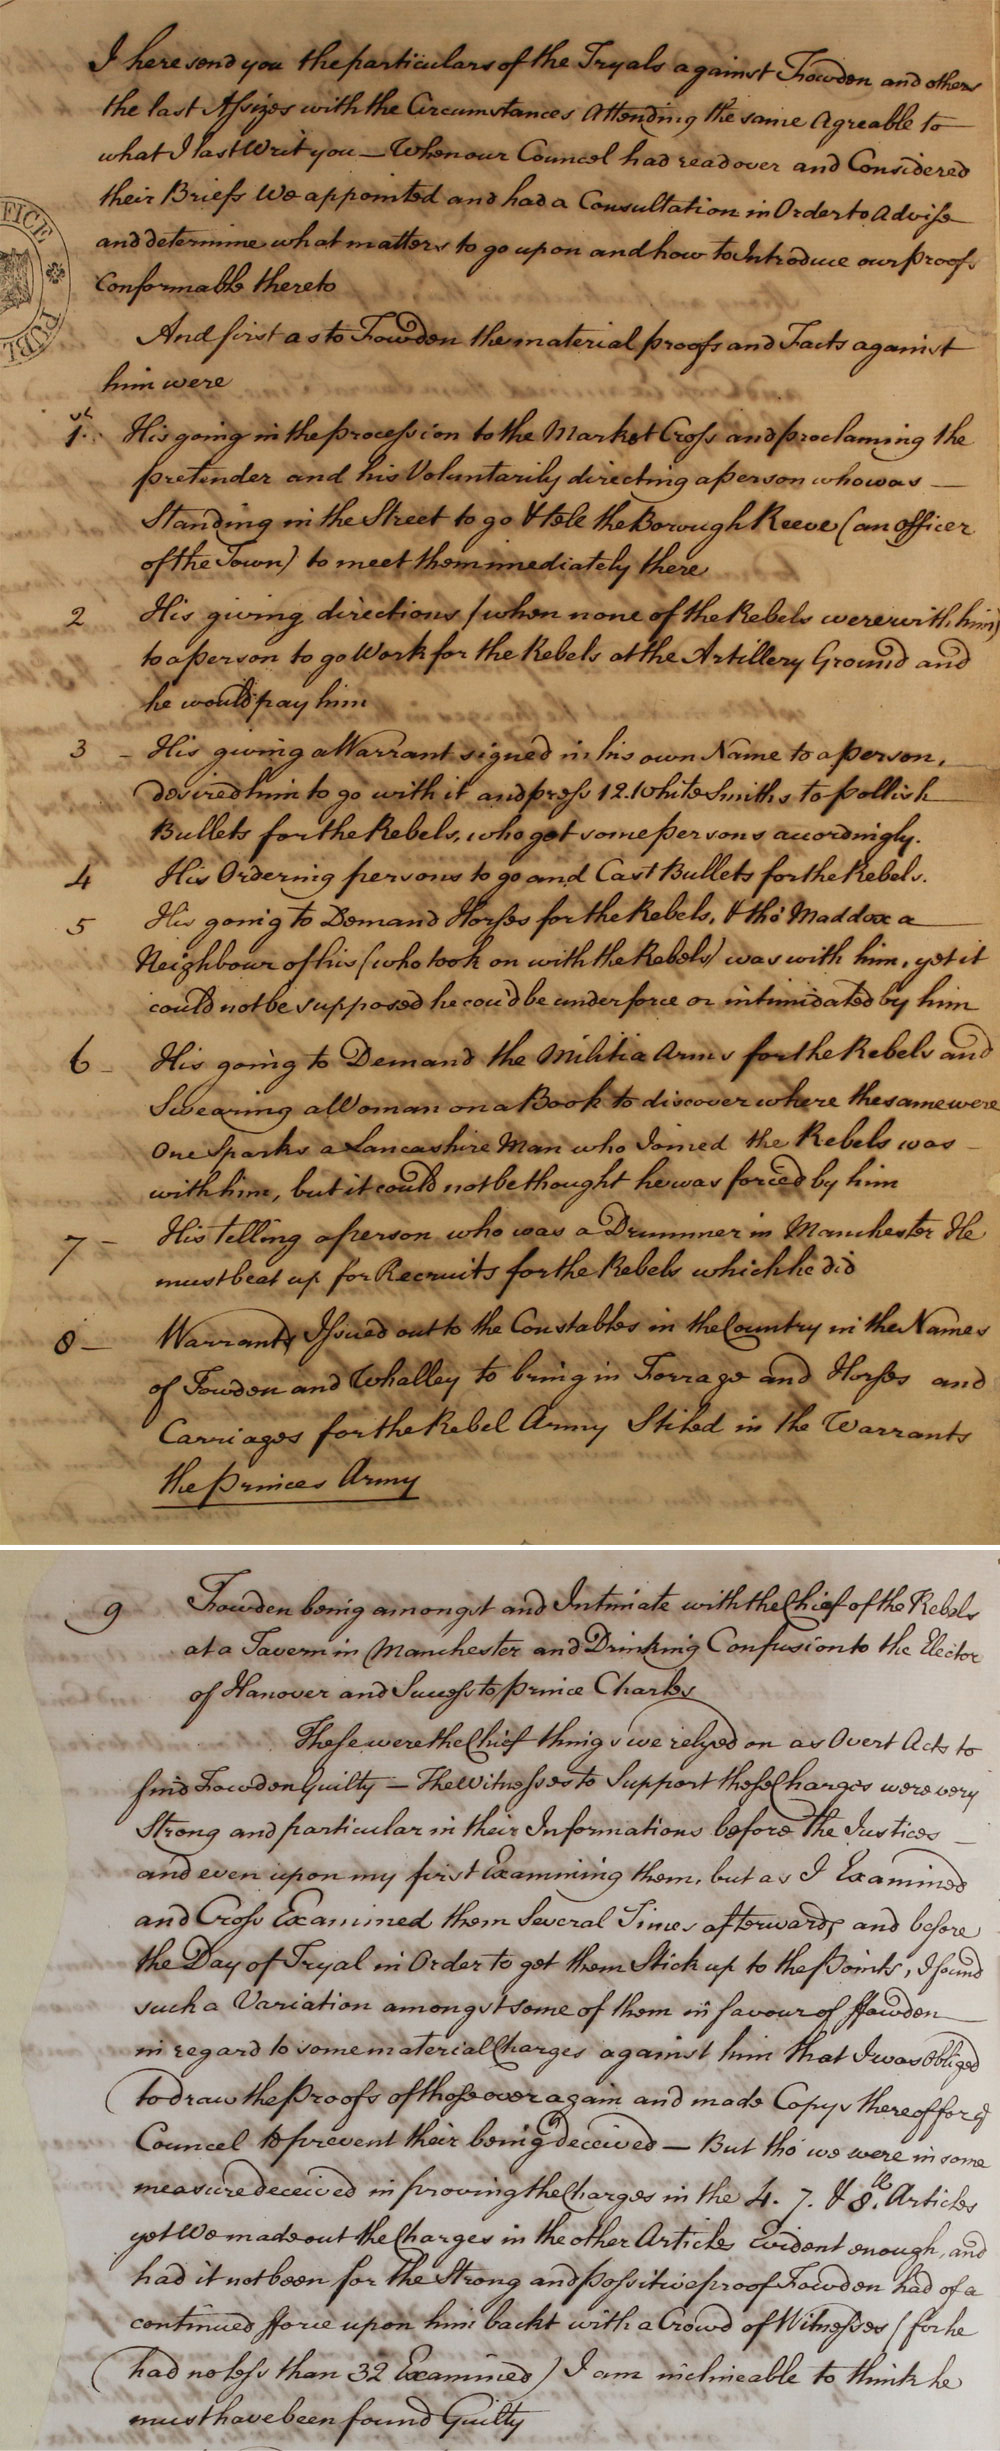 Trial of Mr. Fowden, 1747 (SP 36/97/113)